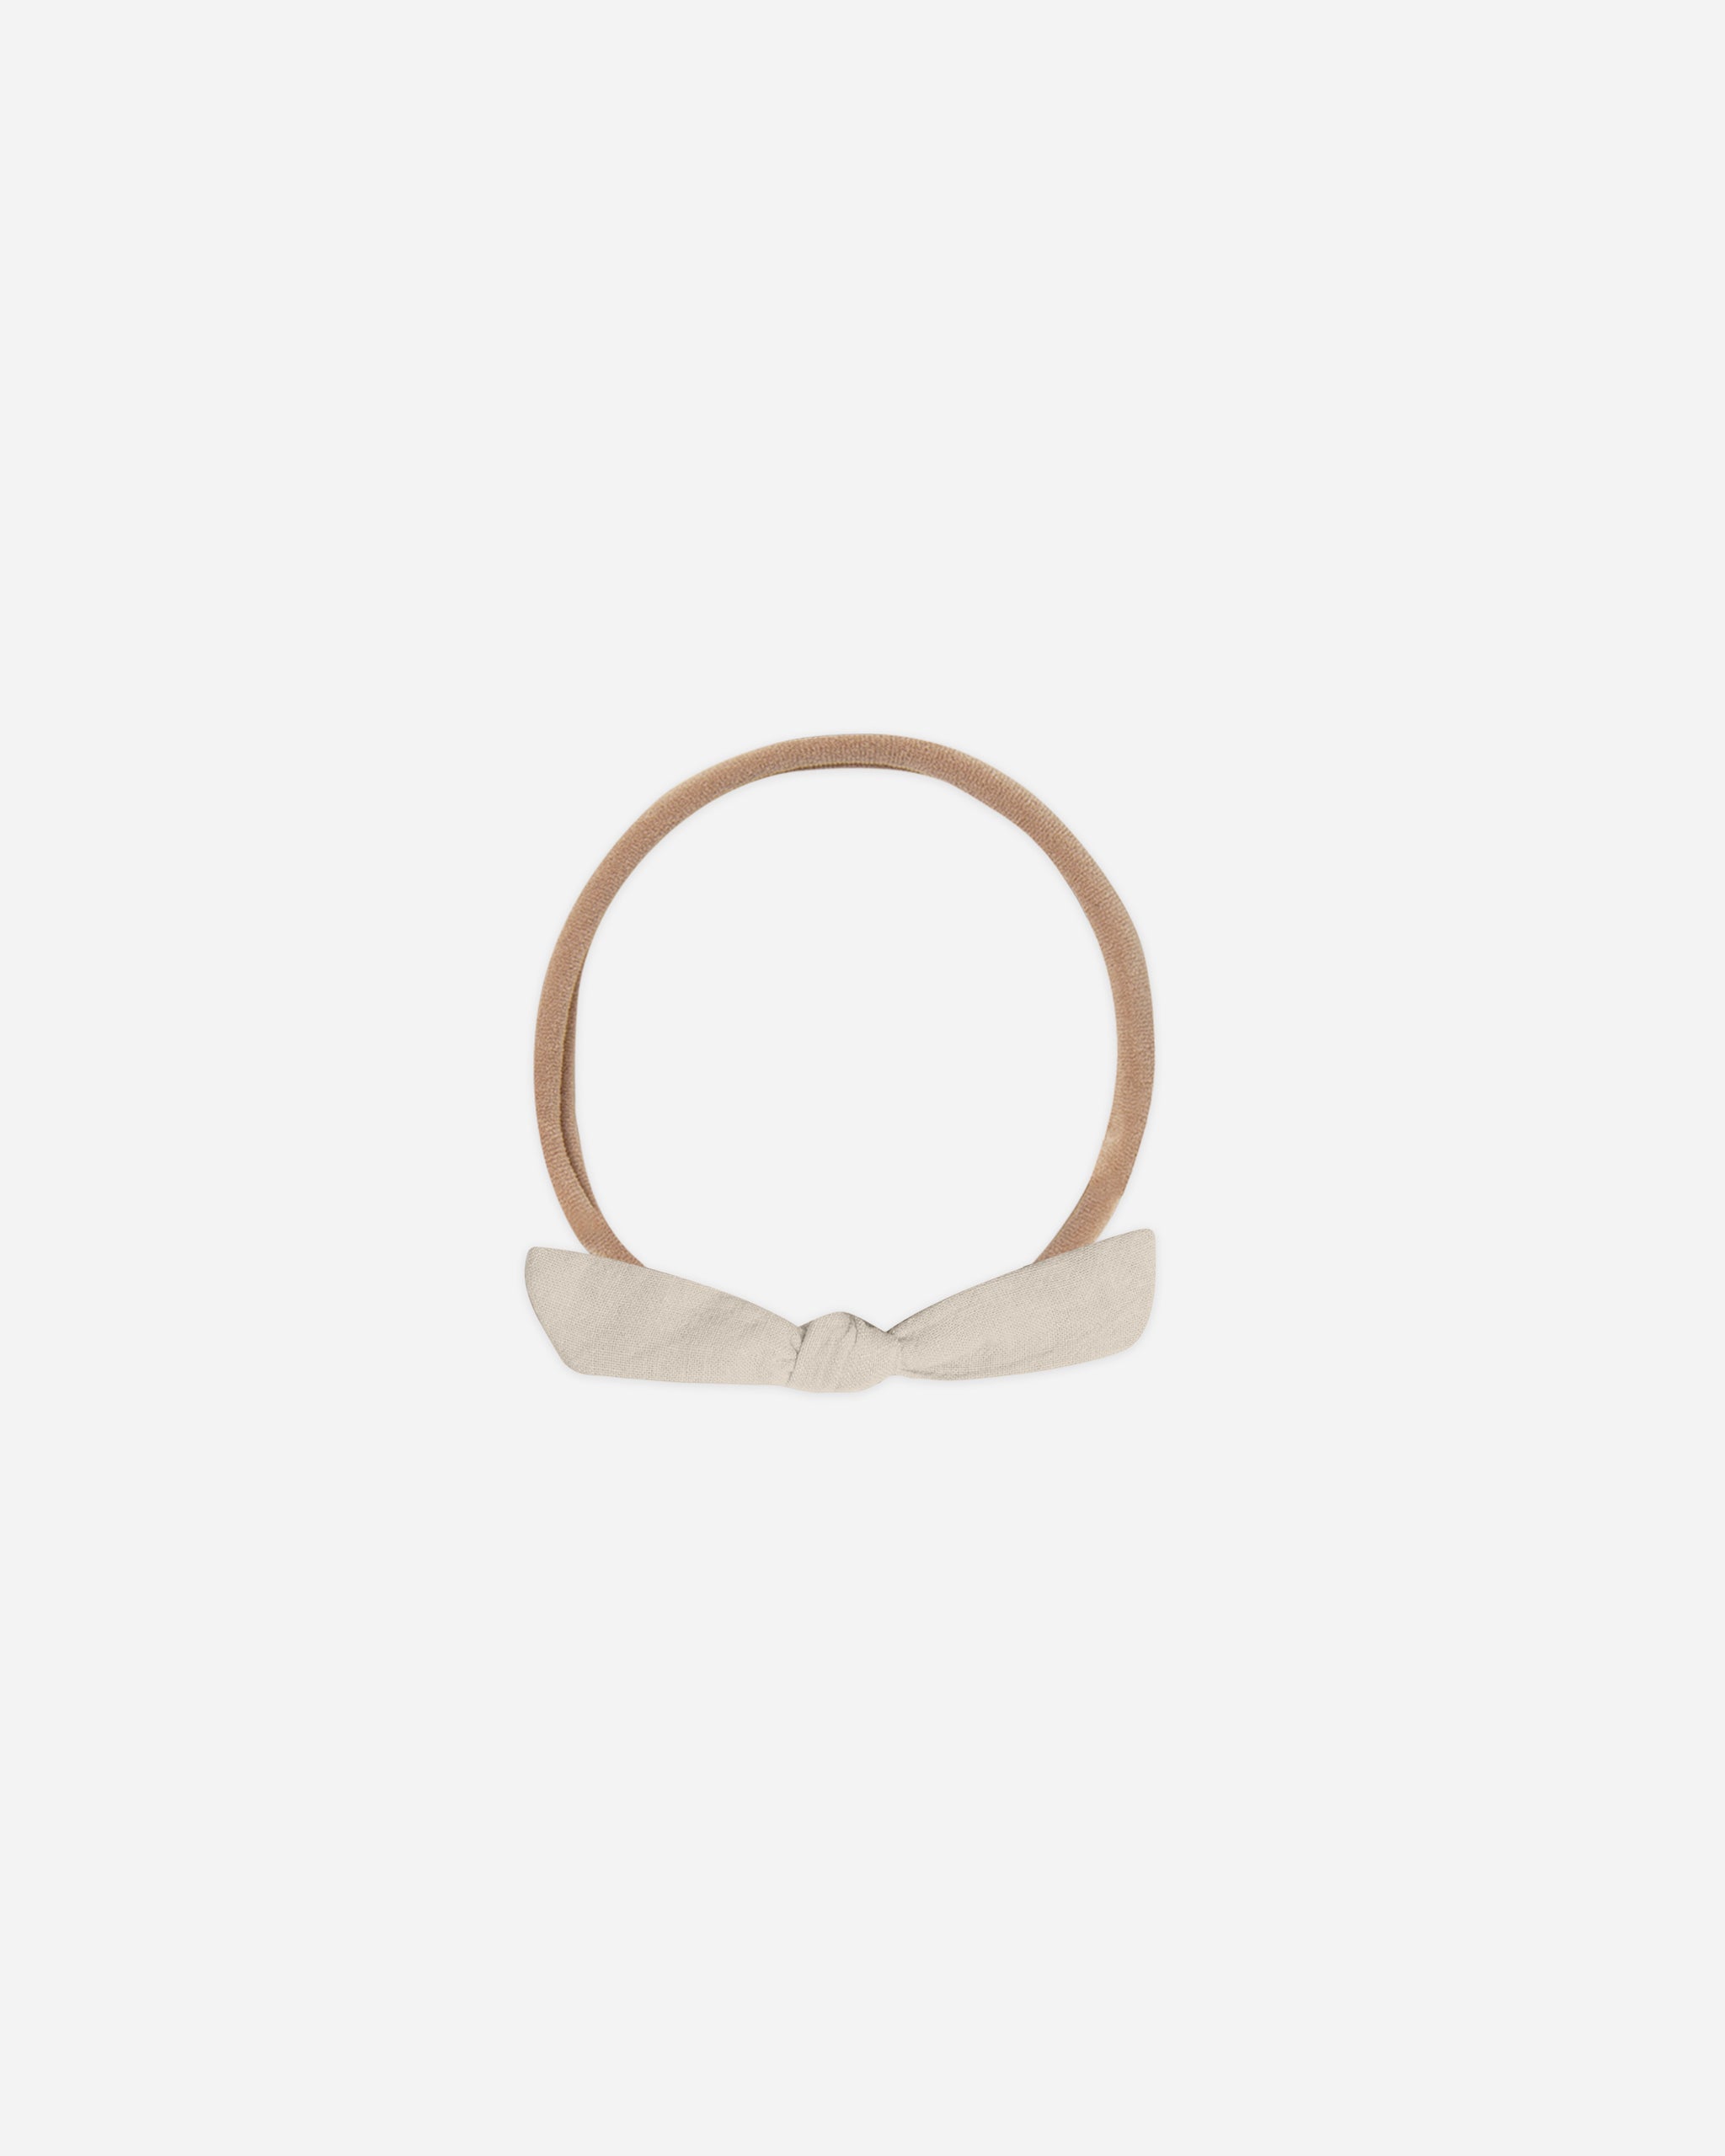 Knot Headband || Natural - Rylee + Cru | Kids Clothes | Trendy Baby Clothes | Modern Infant Outfits |